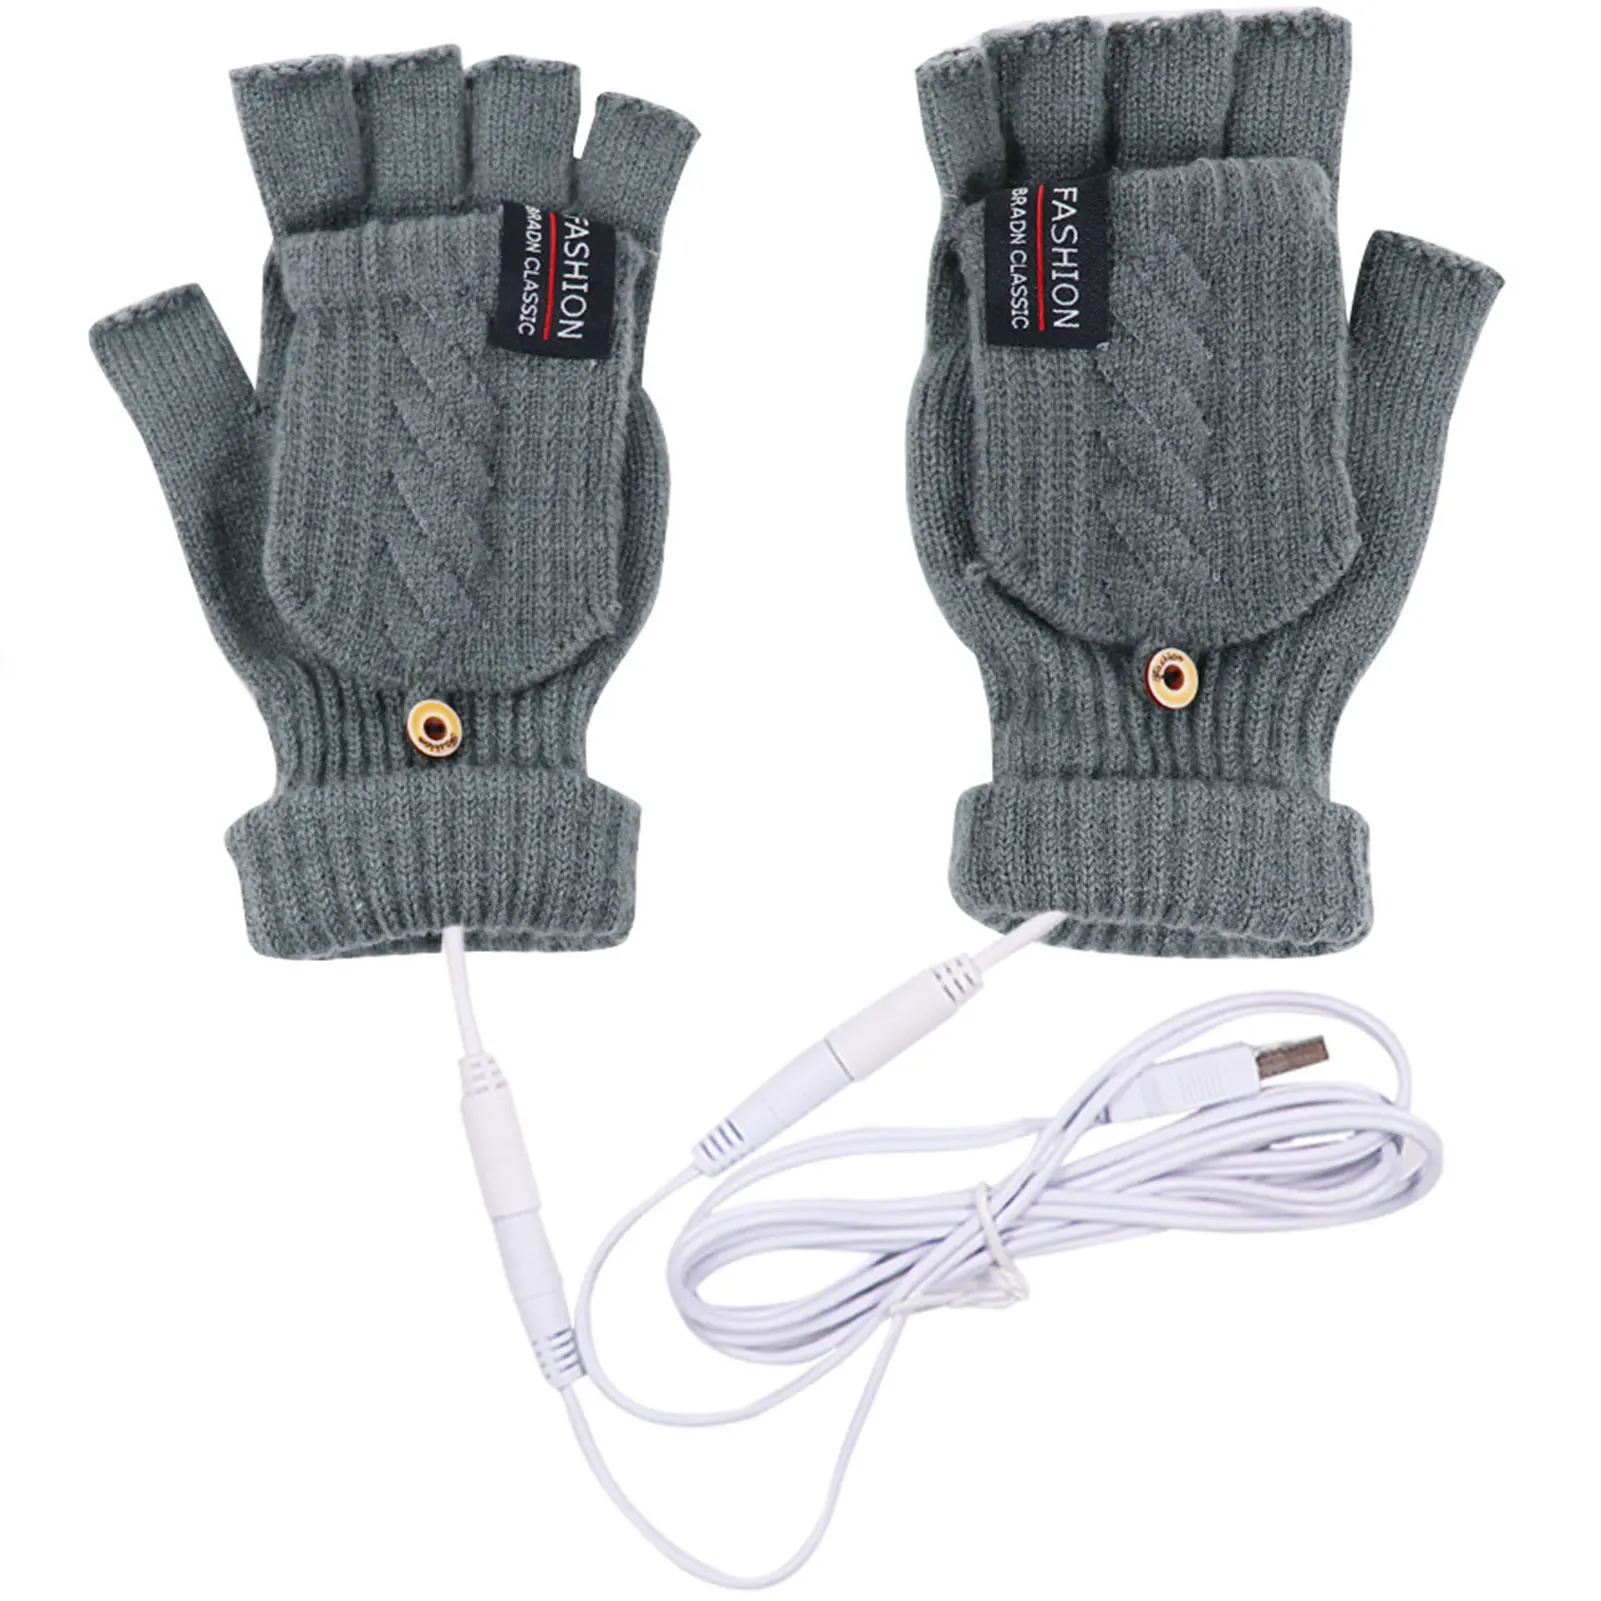 

USB Heated Striped Gloves Soft Material Fine Workmanship Hands Warmer for Winter Gift Christmas Gift